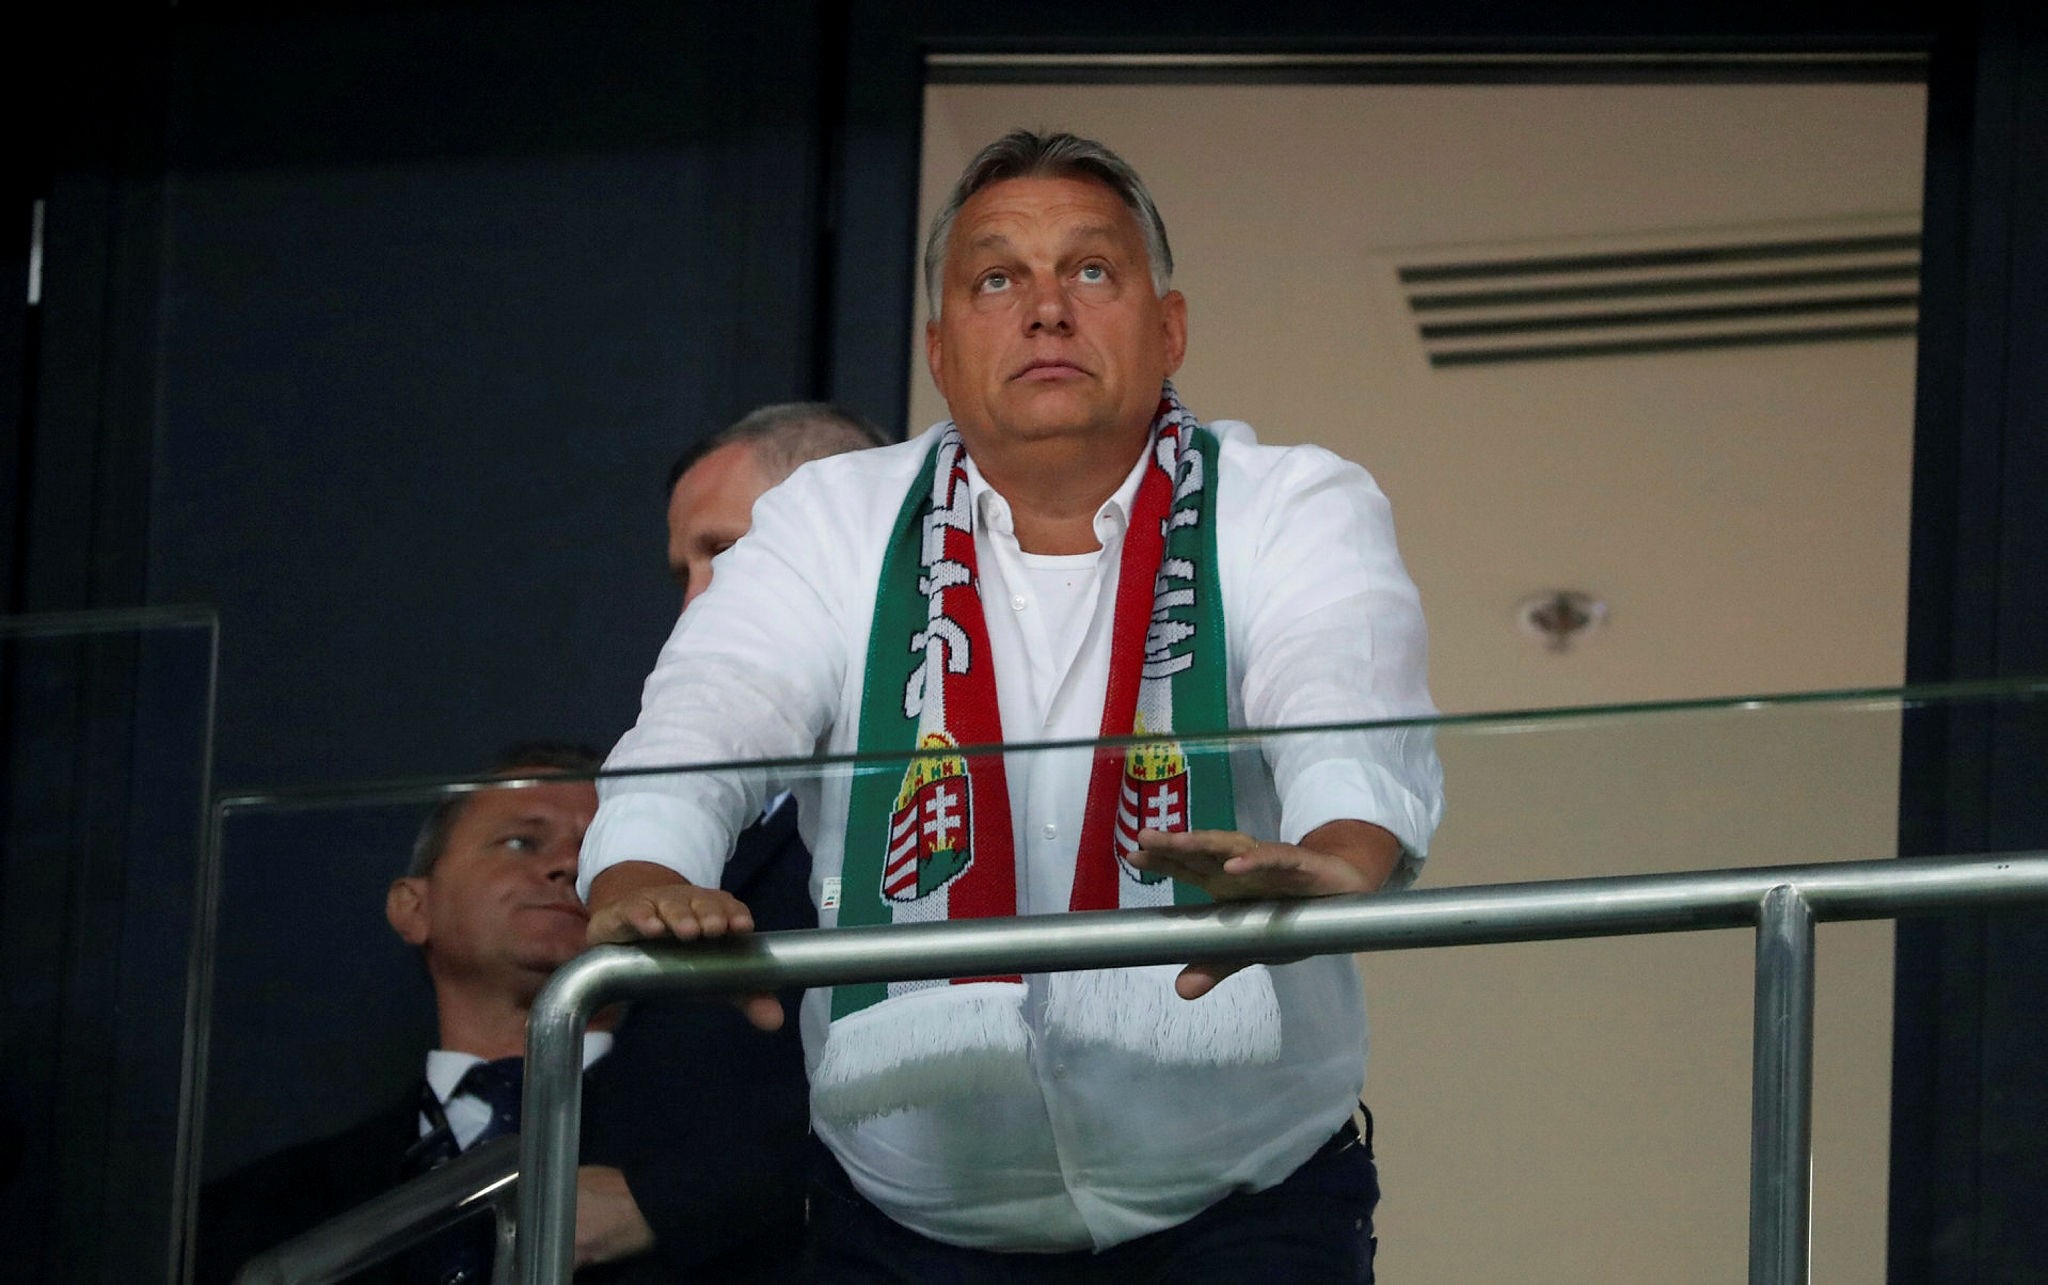 Hungarian Prime Minister Viktor Orban in the stands before the Hungary vs Portugal football match in Budapest, Sept. 3.